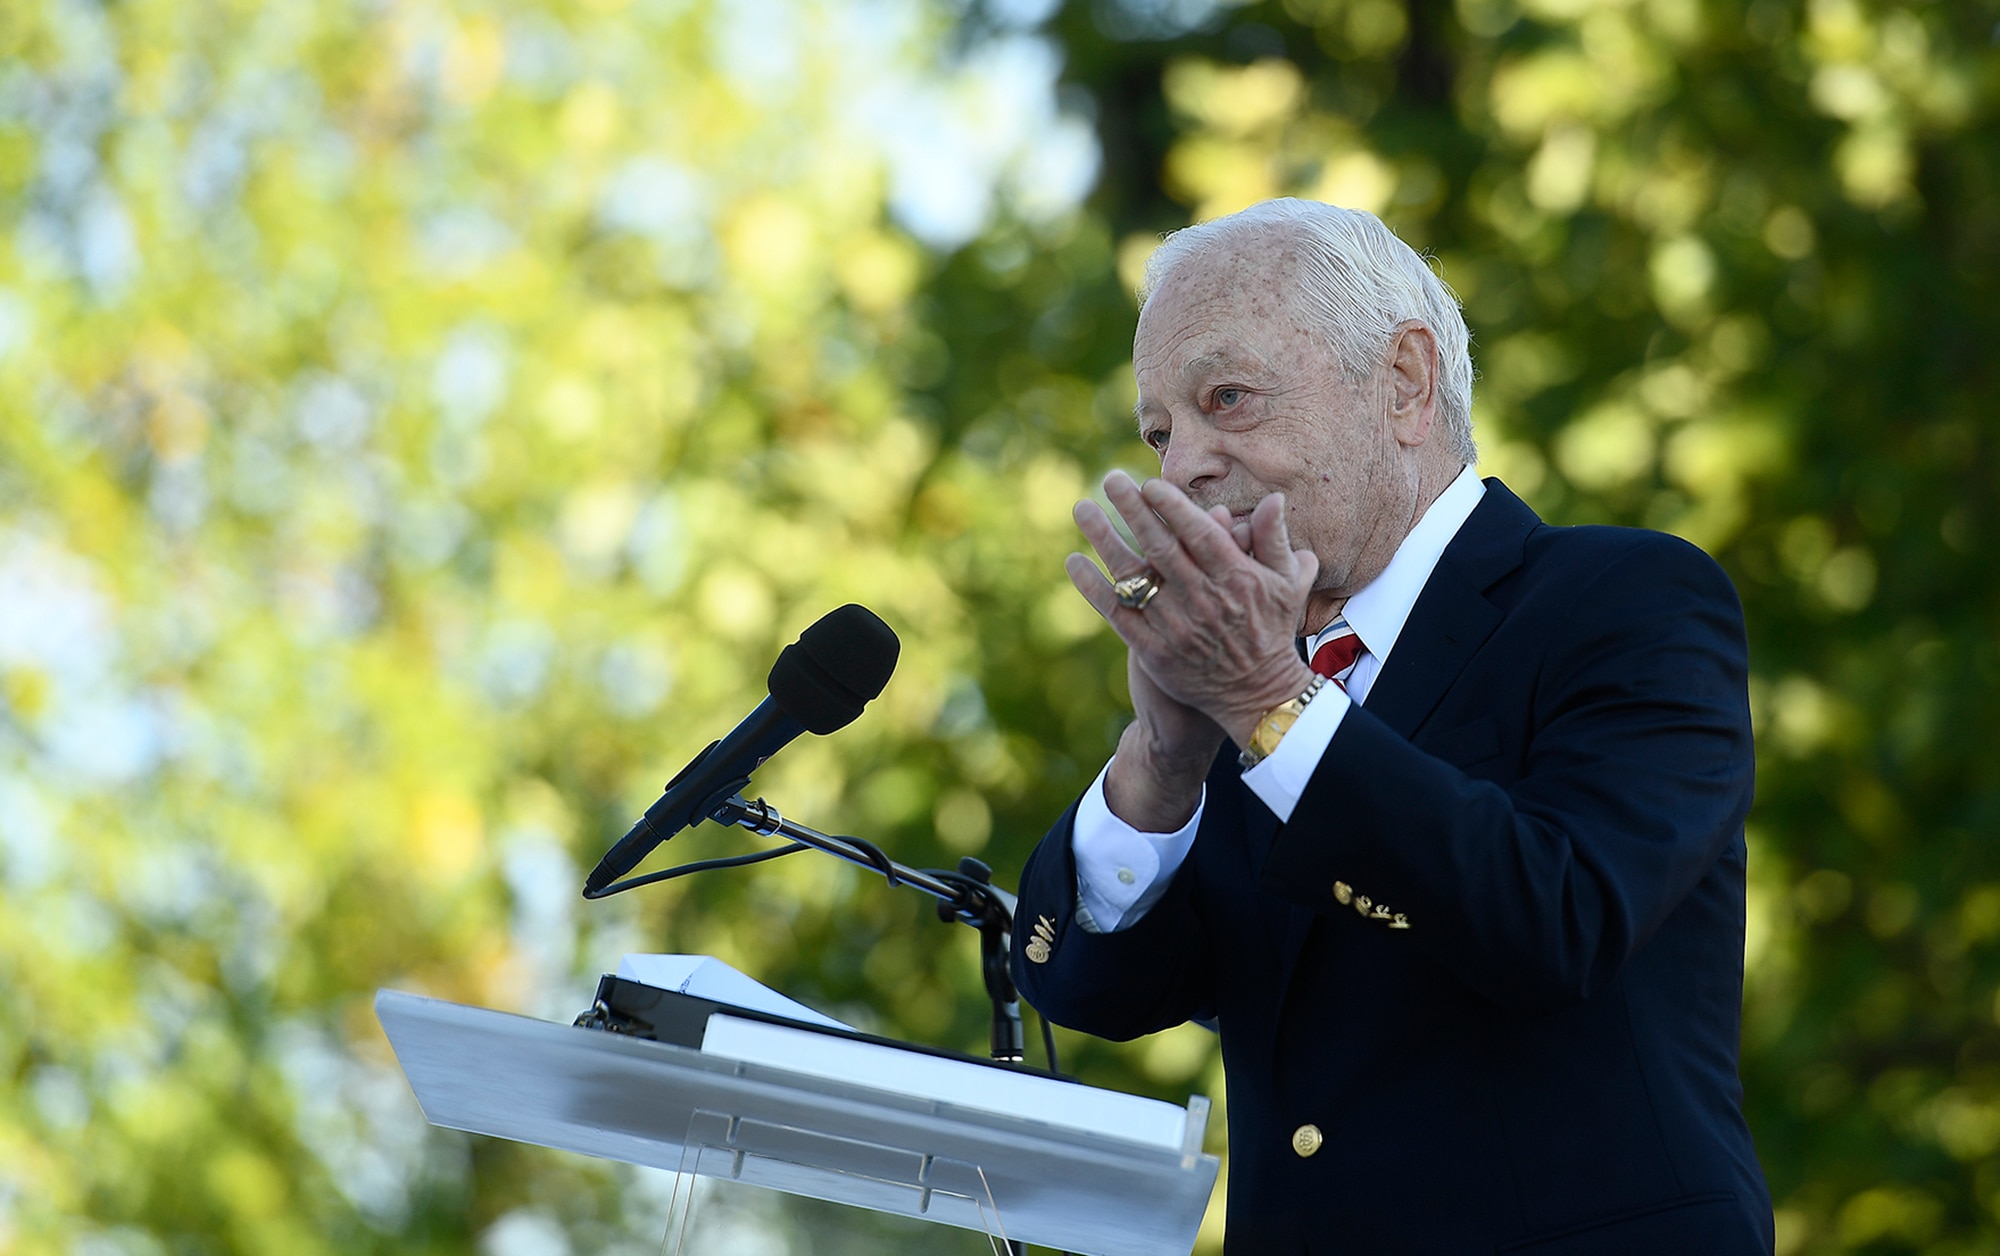 Bob Schieffer, a broadcast journalist and Air Force veteran, speaks during the Air Force Memorial's 10th anniversary ceremony in Arlington, Va., Oct. 14, 2016.  (U.S. Air Force photo/Scott M. Ash)